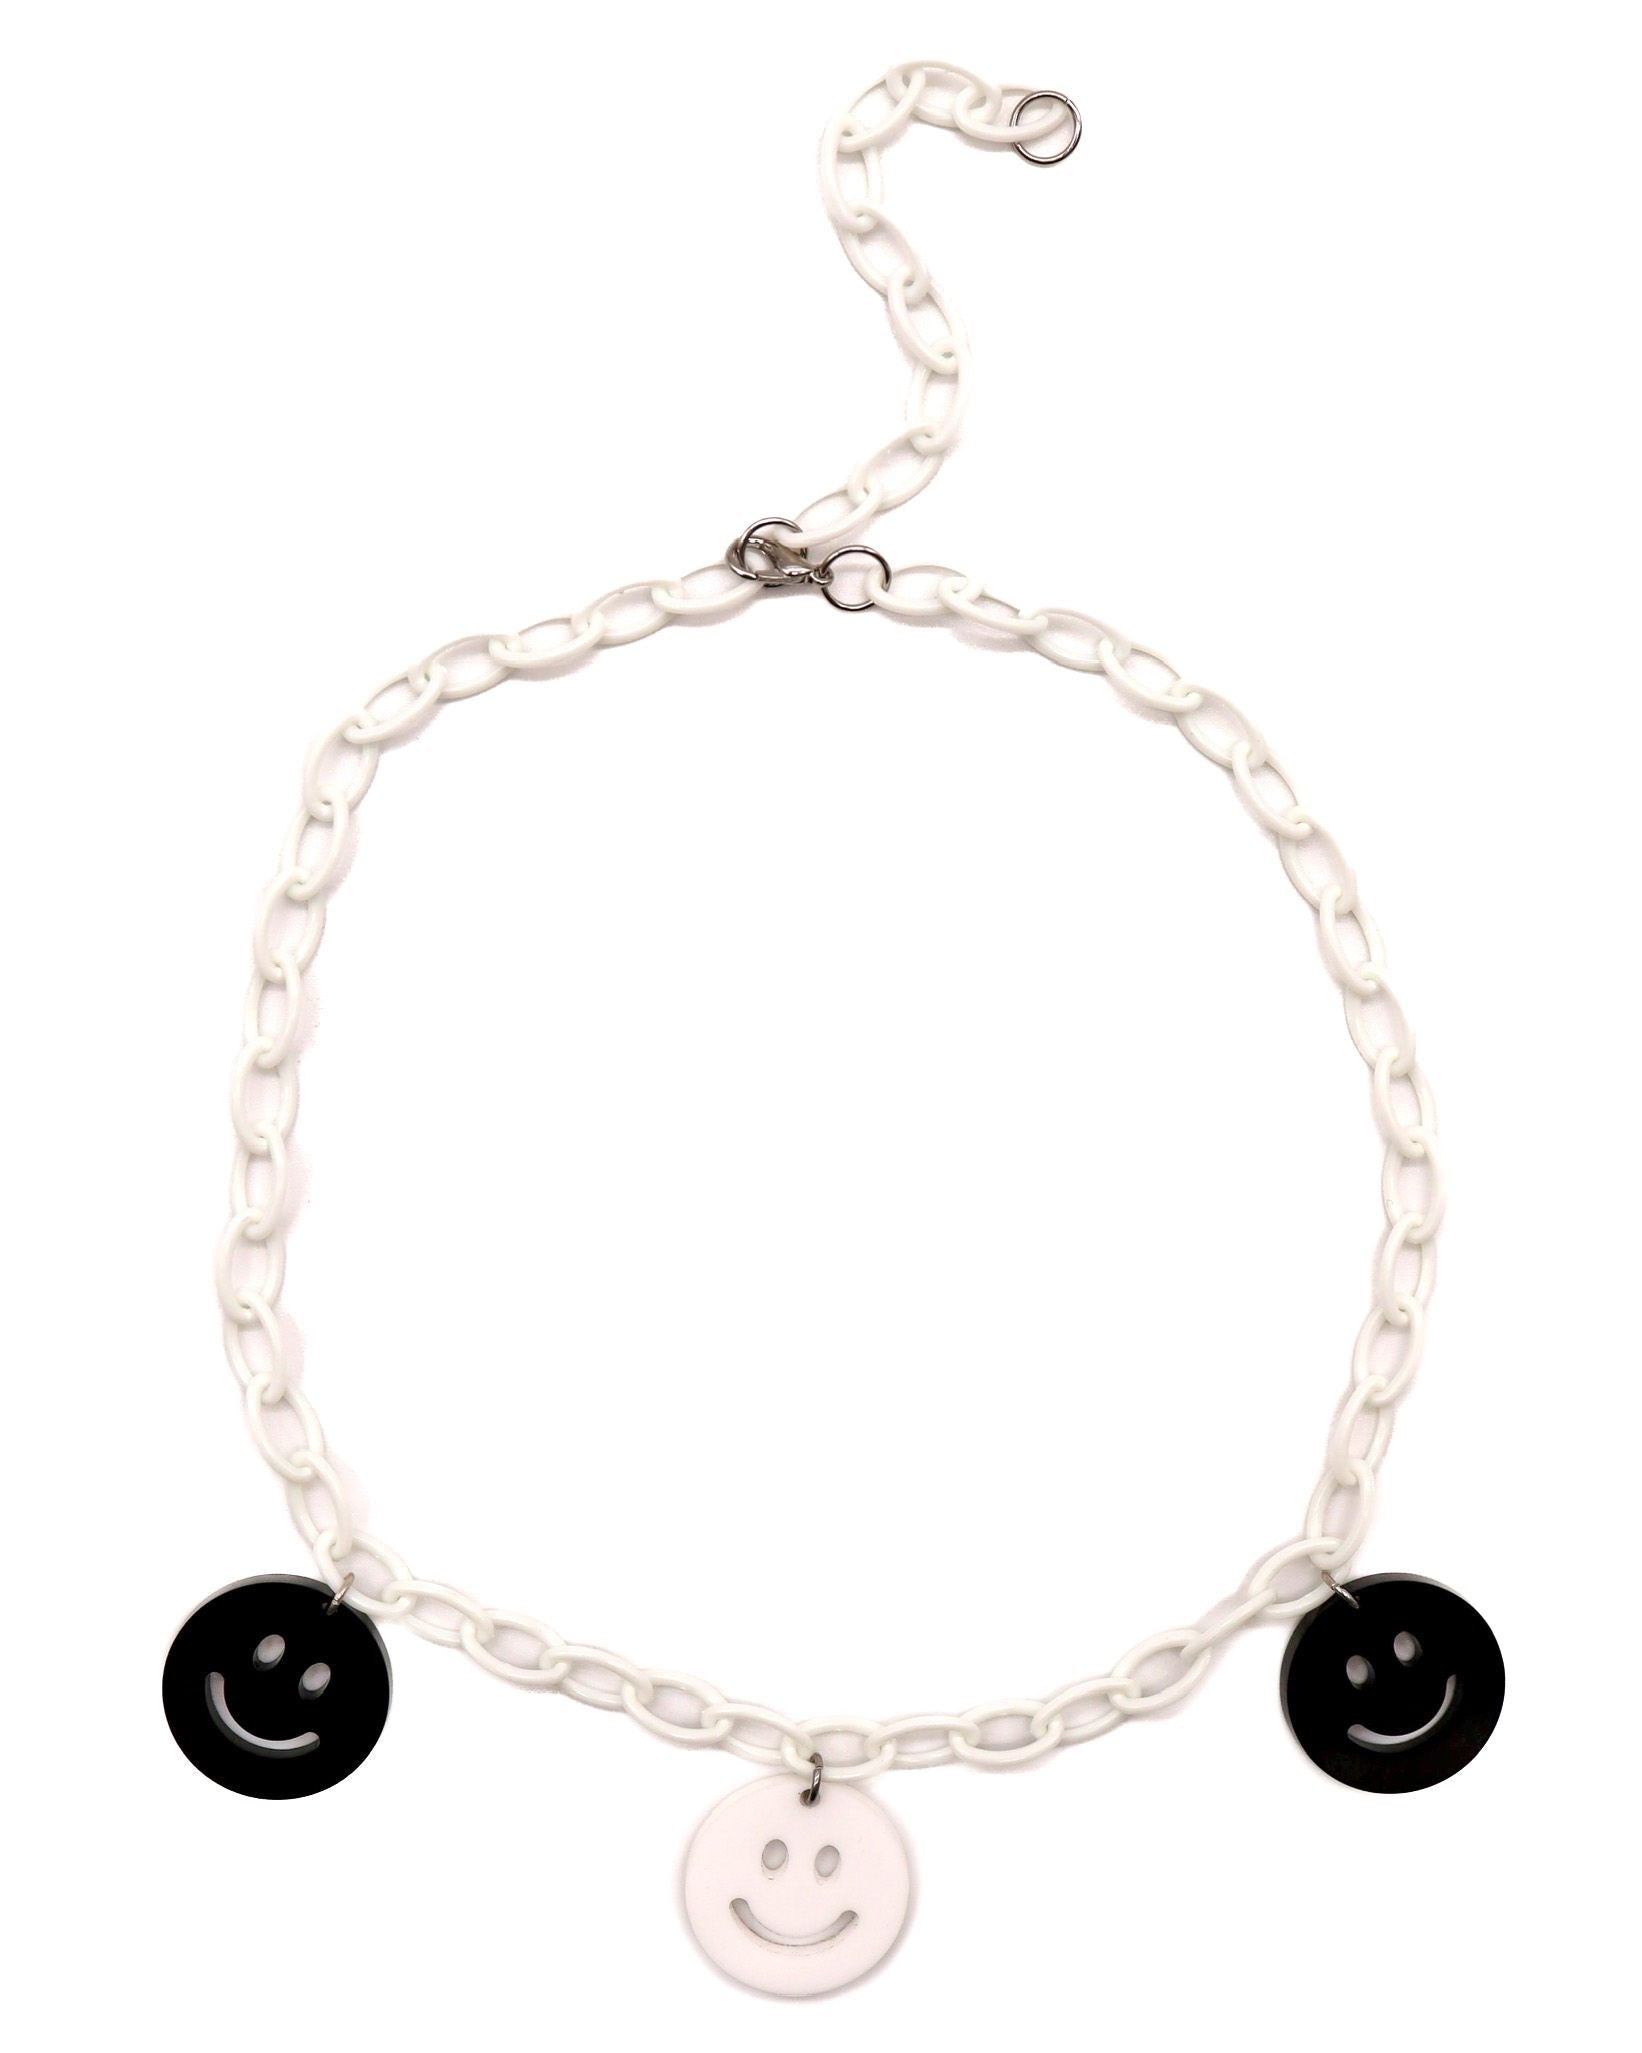 All Smiles Choker Necklace, Necklace, - One Stop Rave